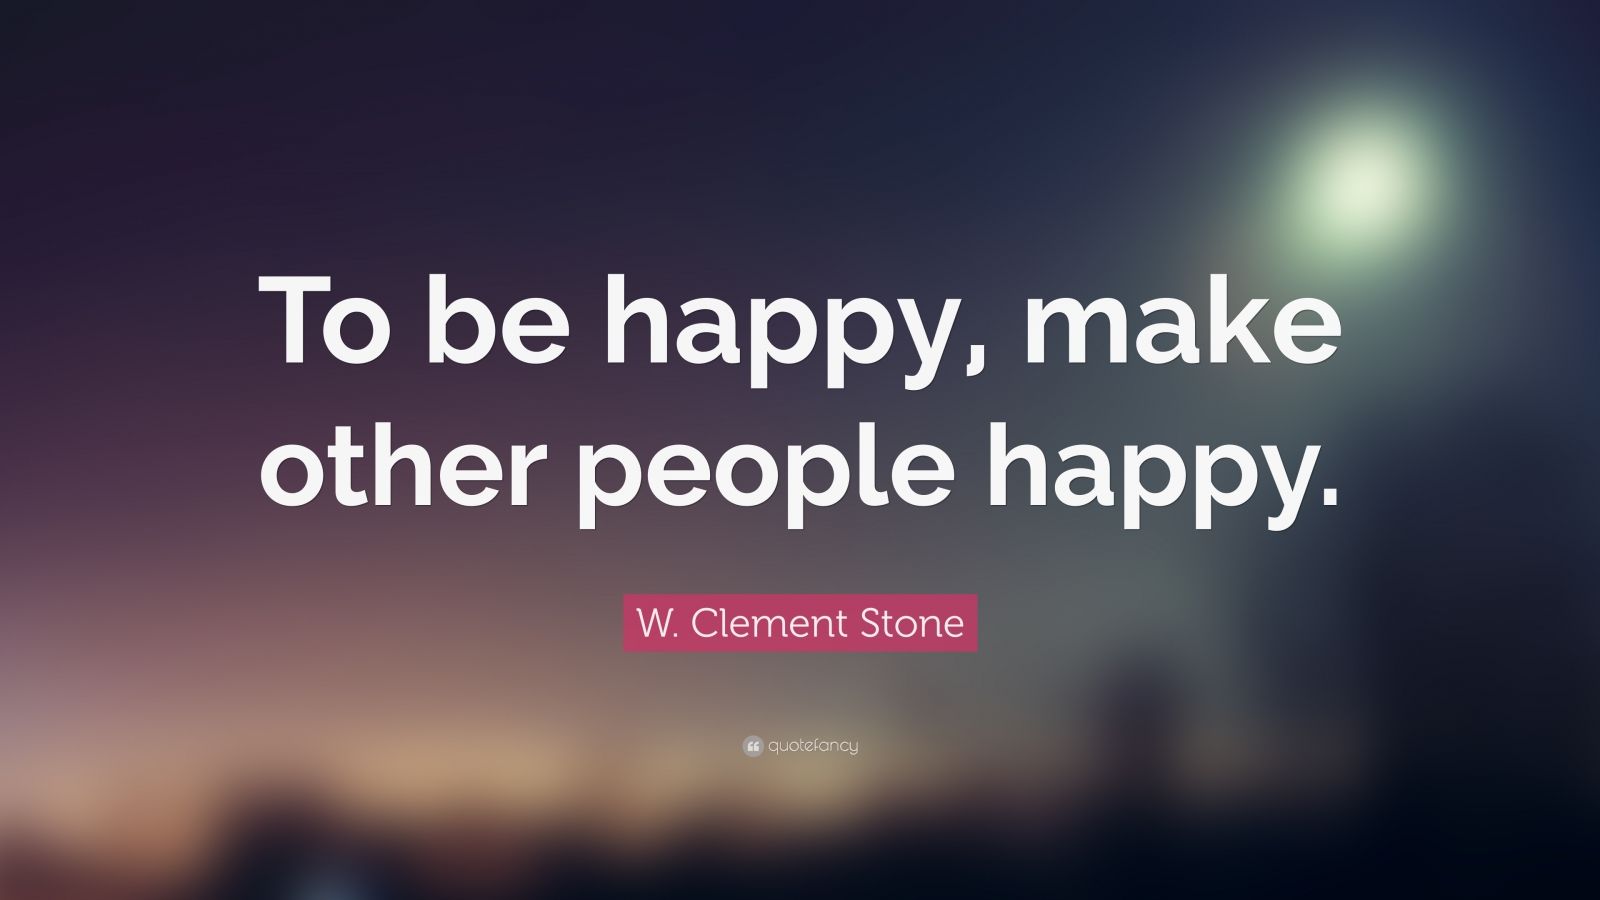 W. Clement Stone Quote: “To be happy, make other people happy.” (10 ...